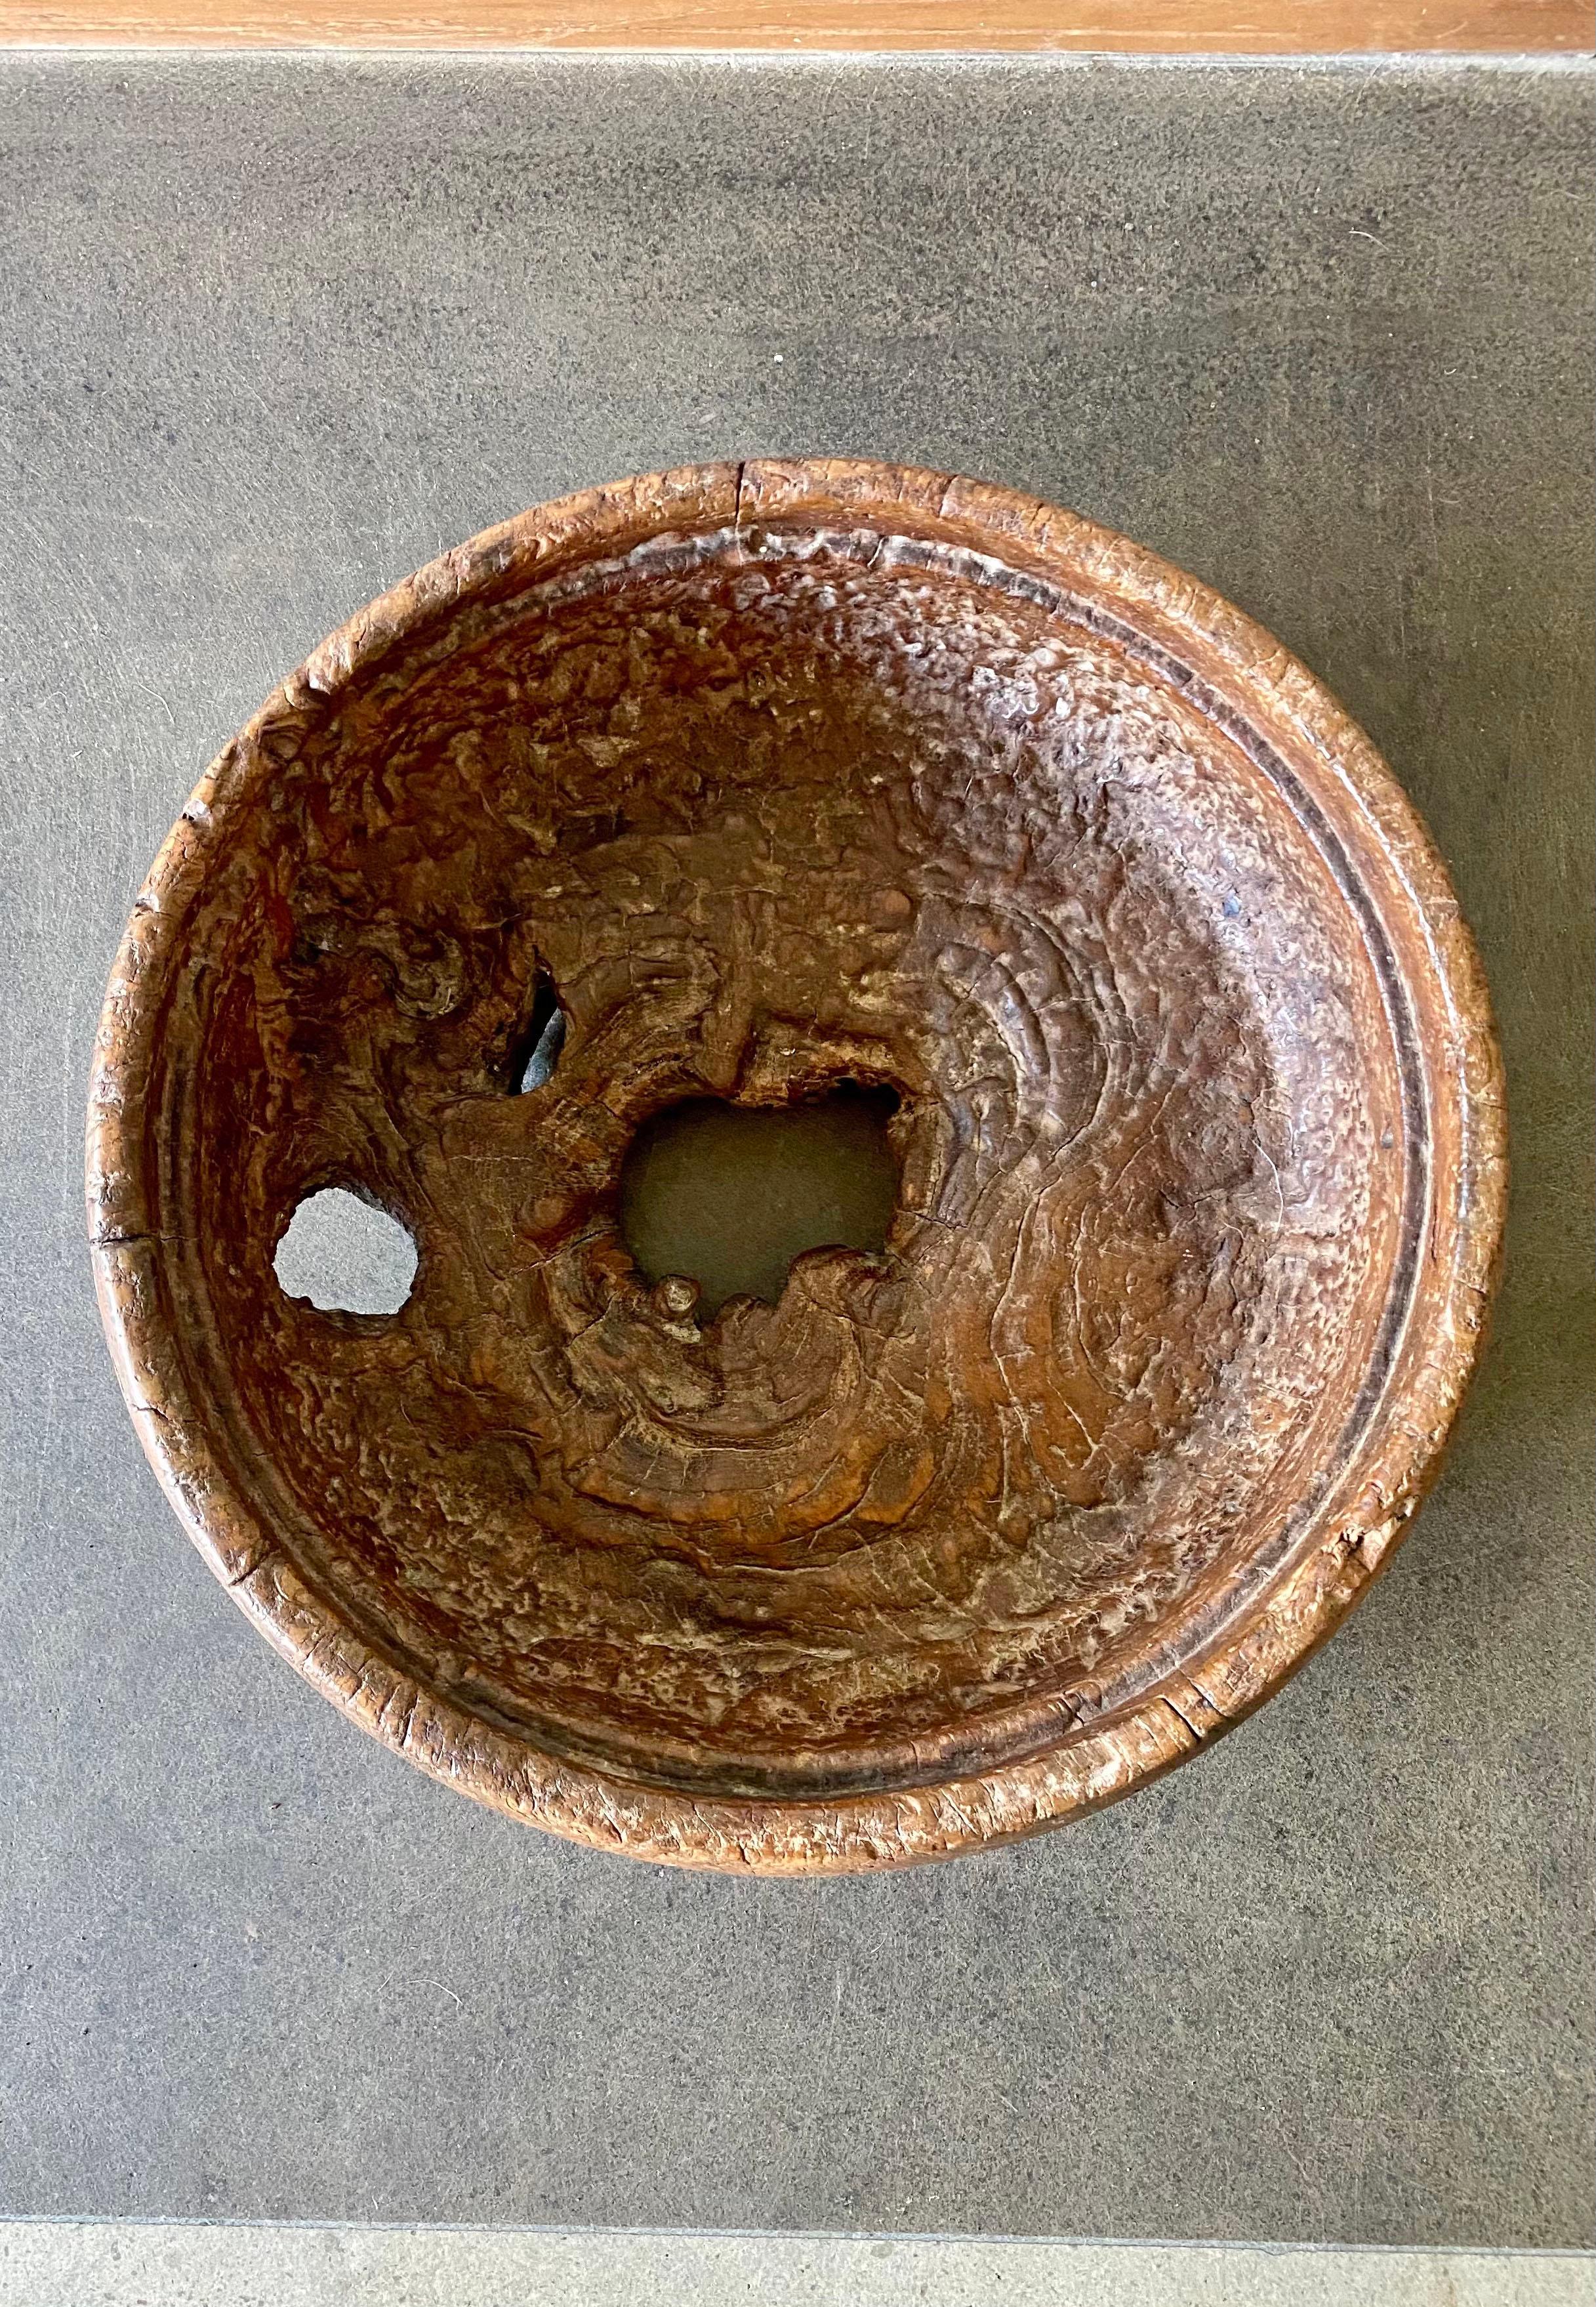 Indonesian Teak Burl Wood Bowl from Java, Indonesia, Late 20th Century For Sale